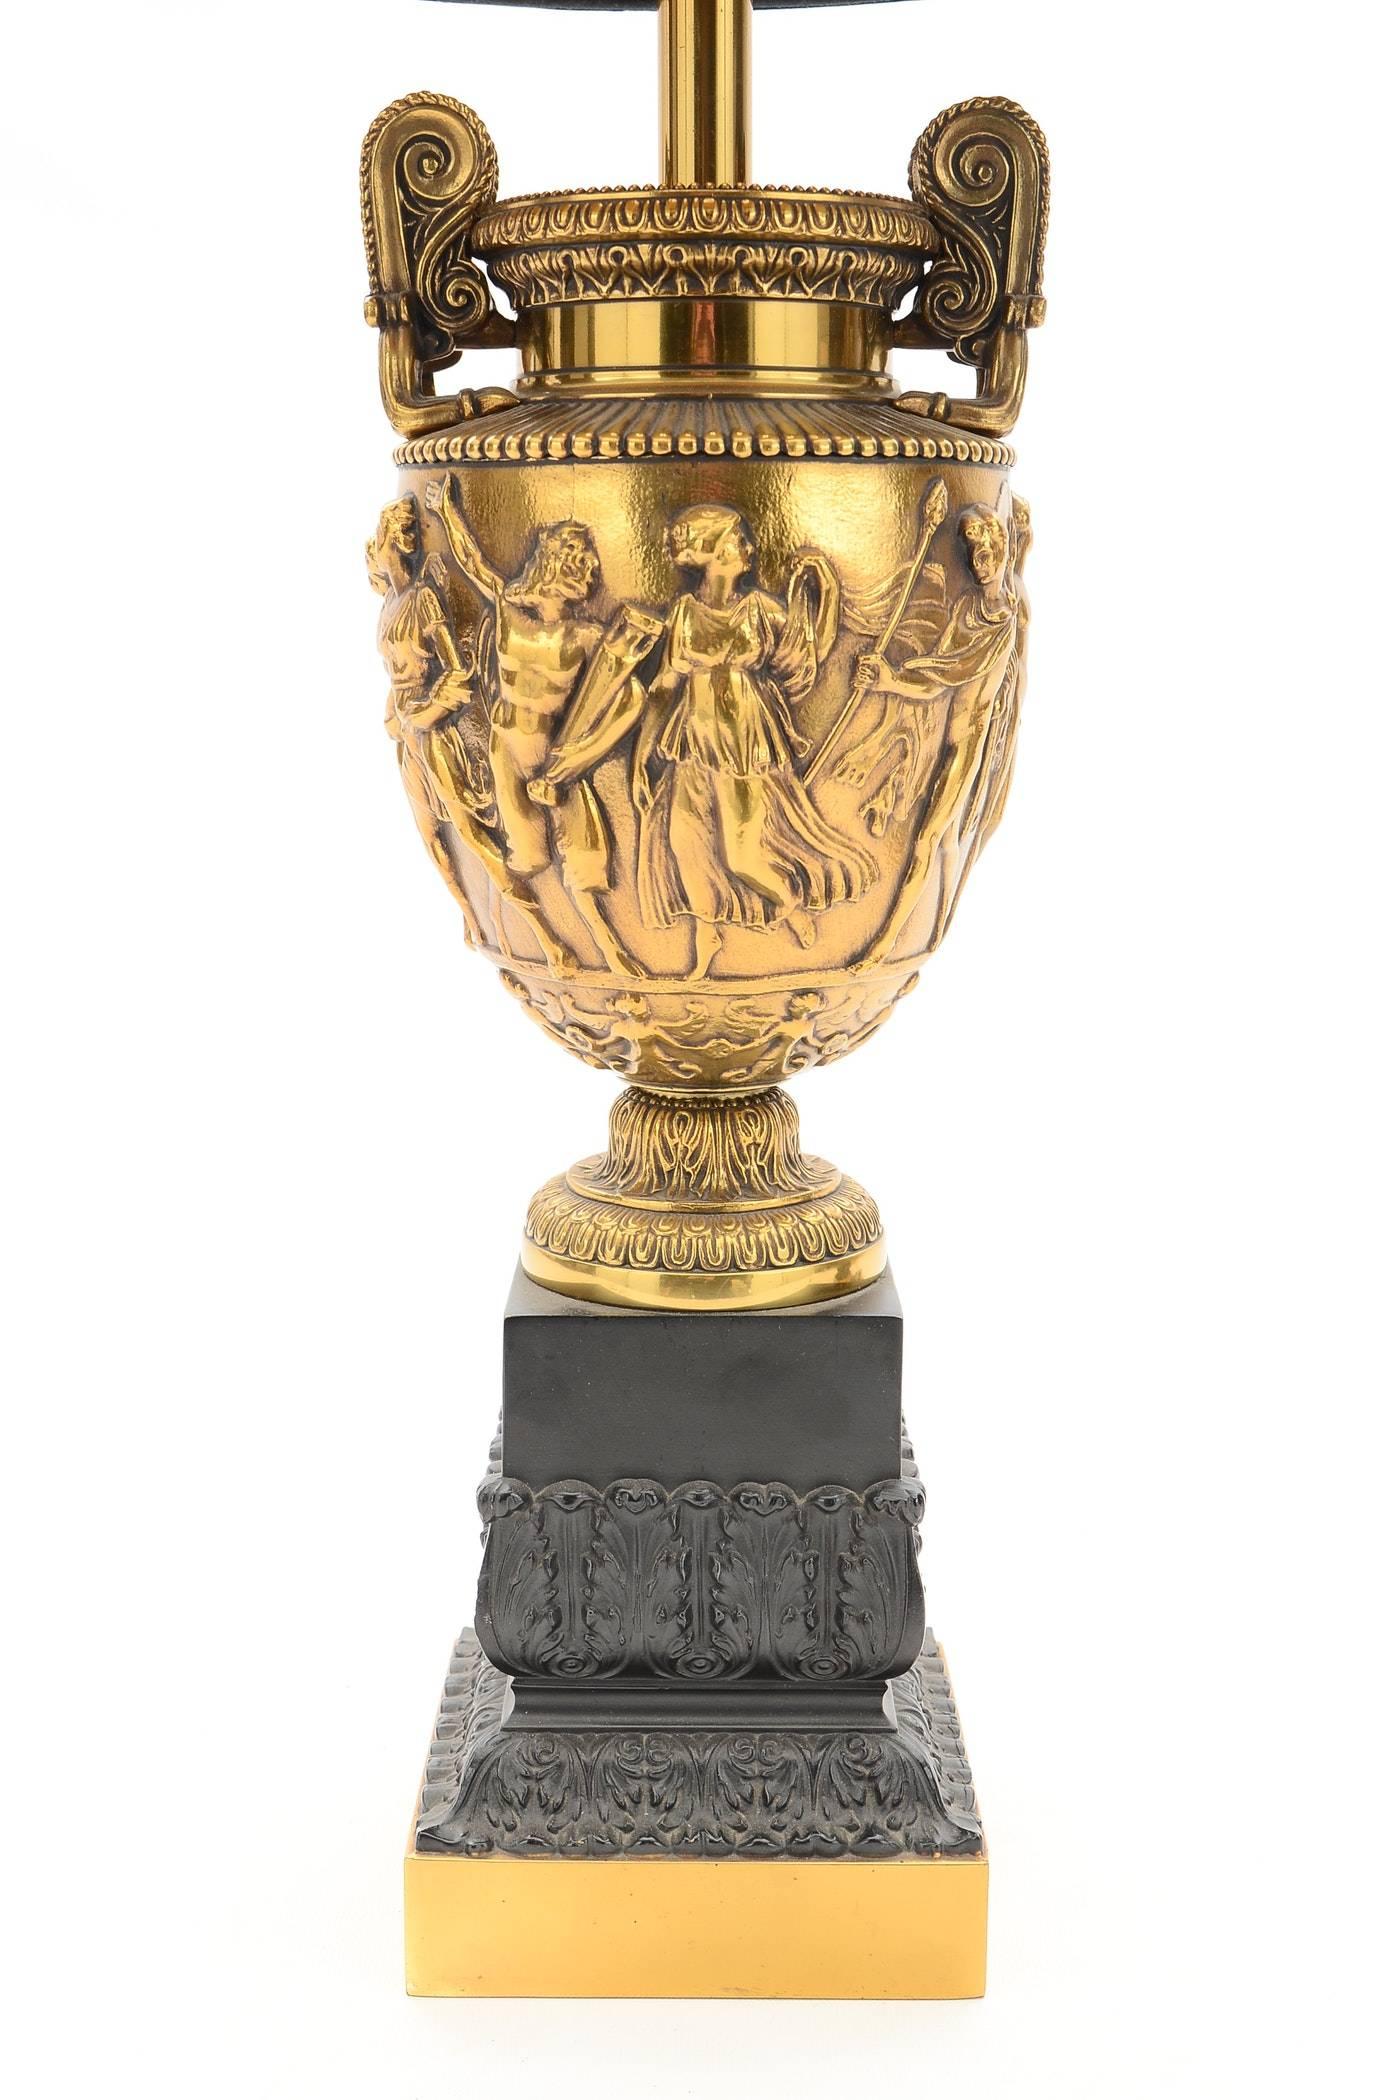 These antiqued brass urn lamps are styled after an ancient Roman vase discovered in 1773, named Townley's vase, kept in British Museum in London. The deep antiqued brass and black finish enhances the rich sculpting details. Stamped with Stiffel.